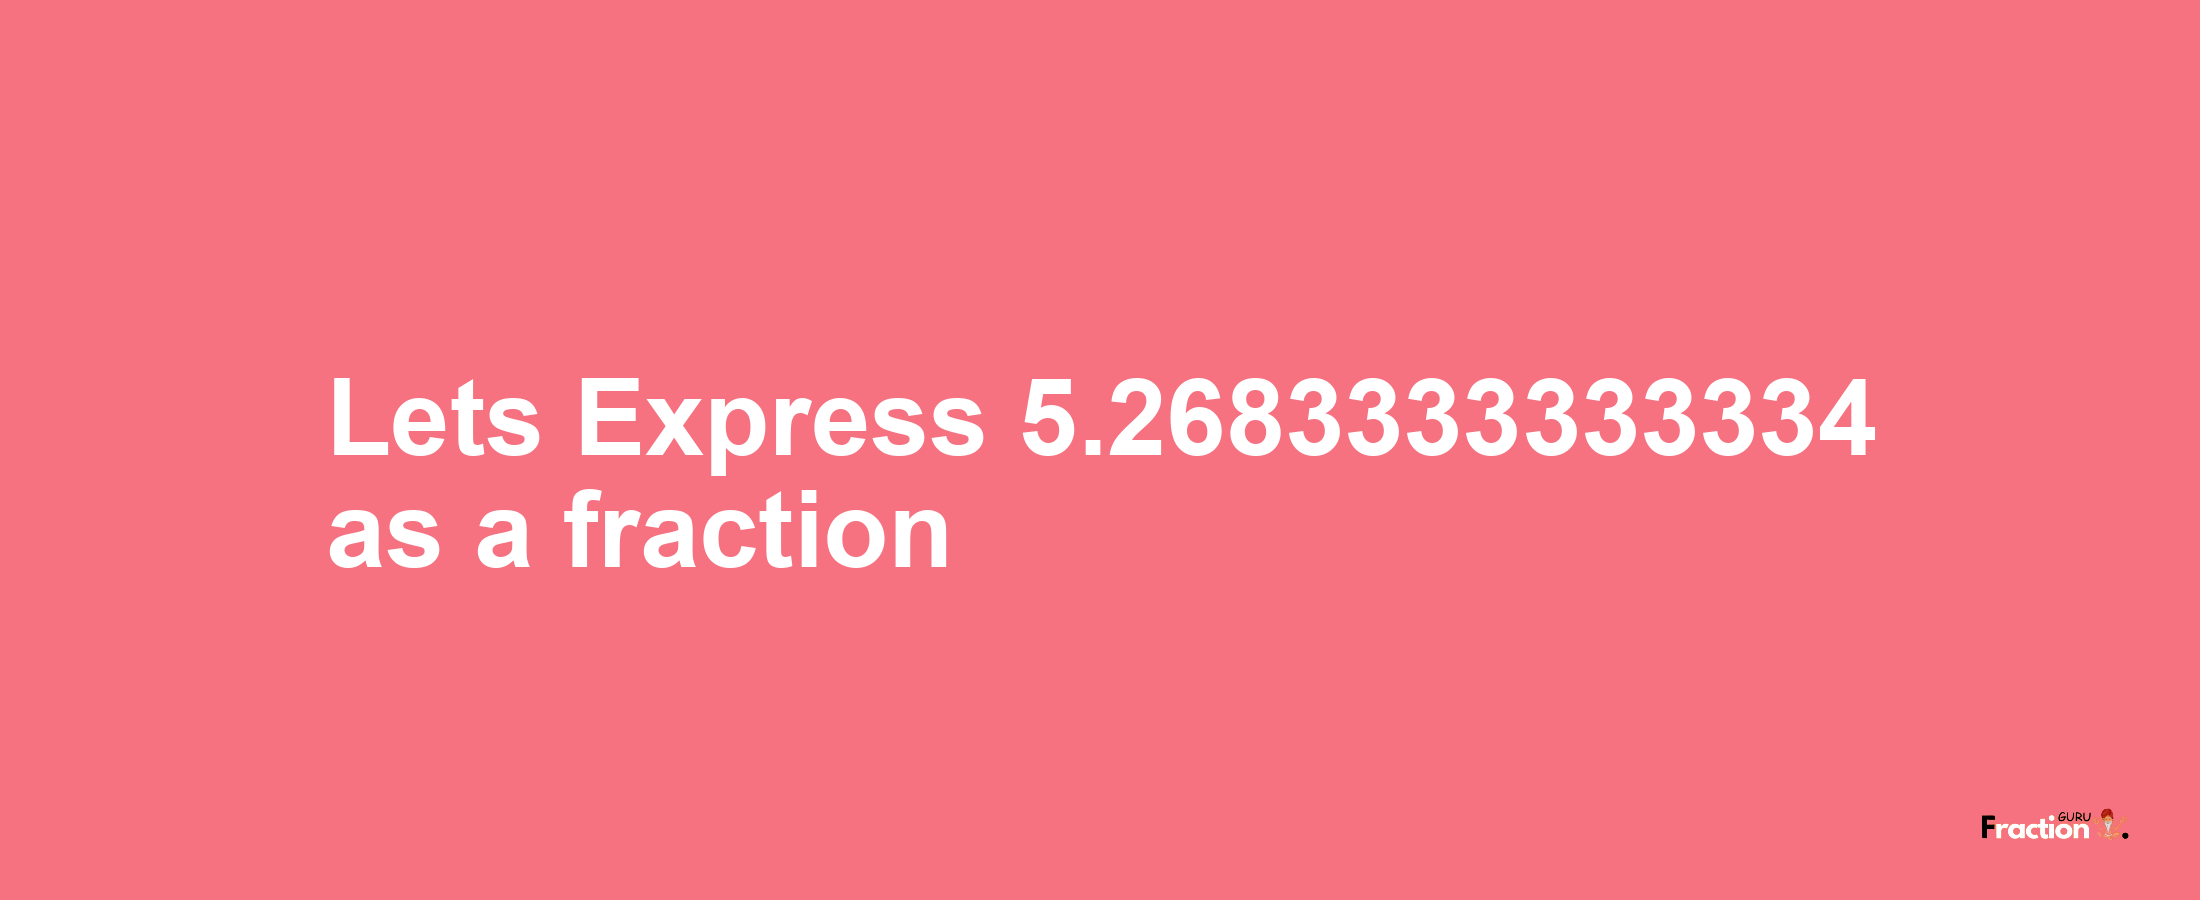 Lets Express 5.2683333333334 as afraction